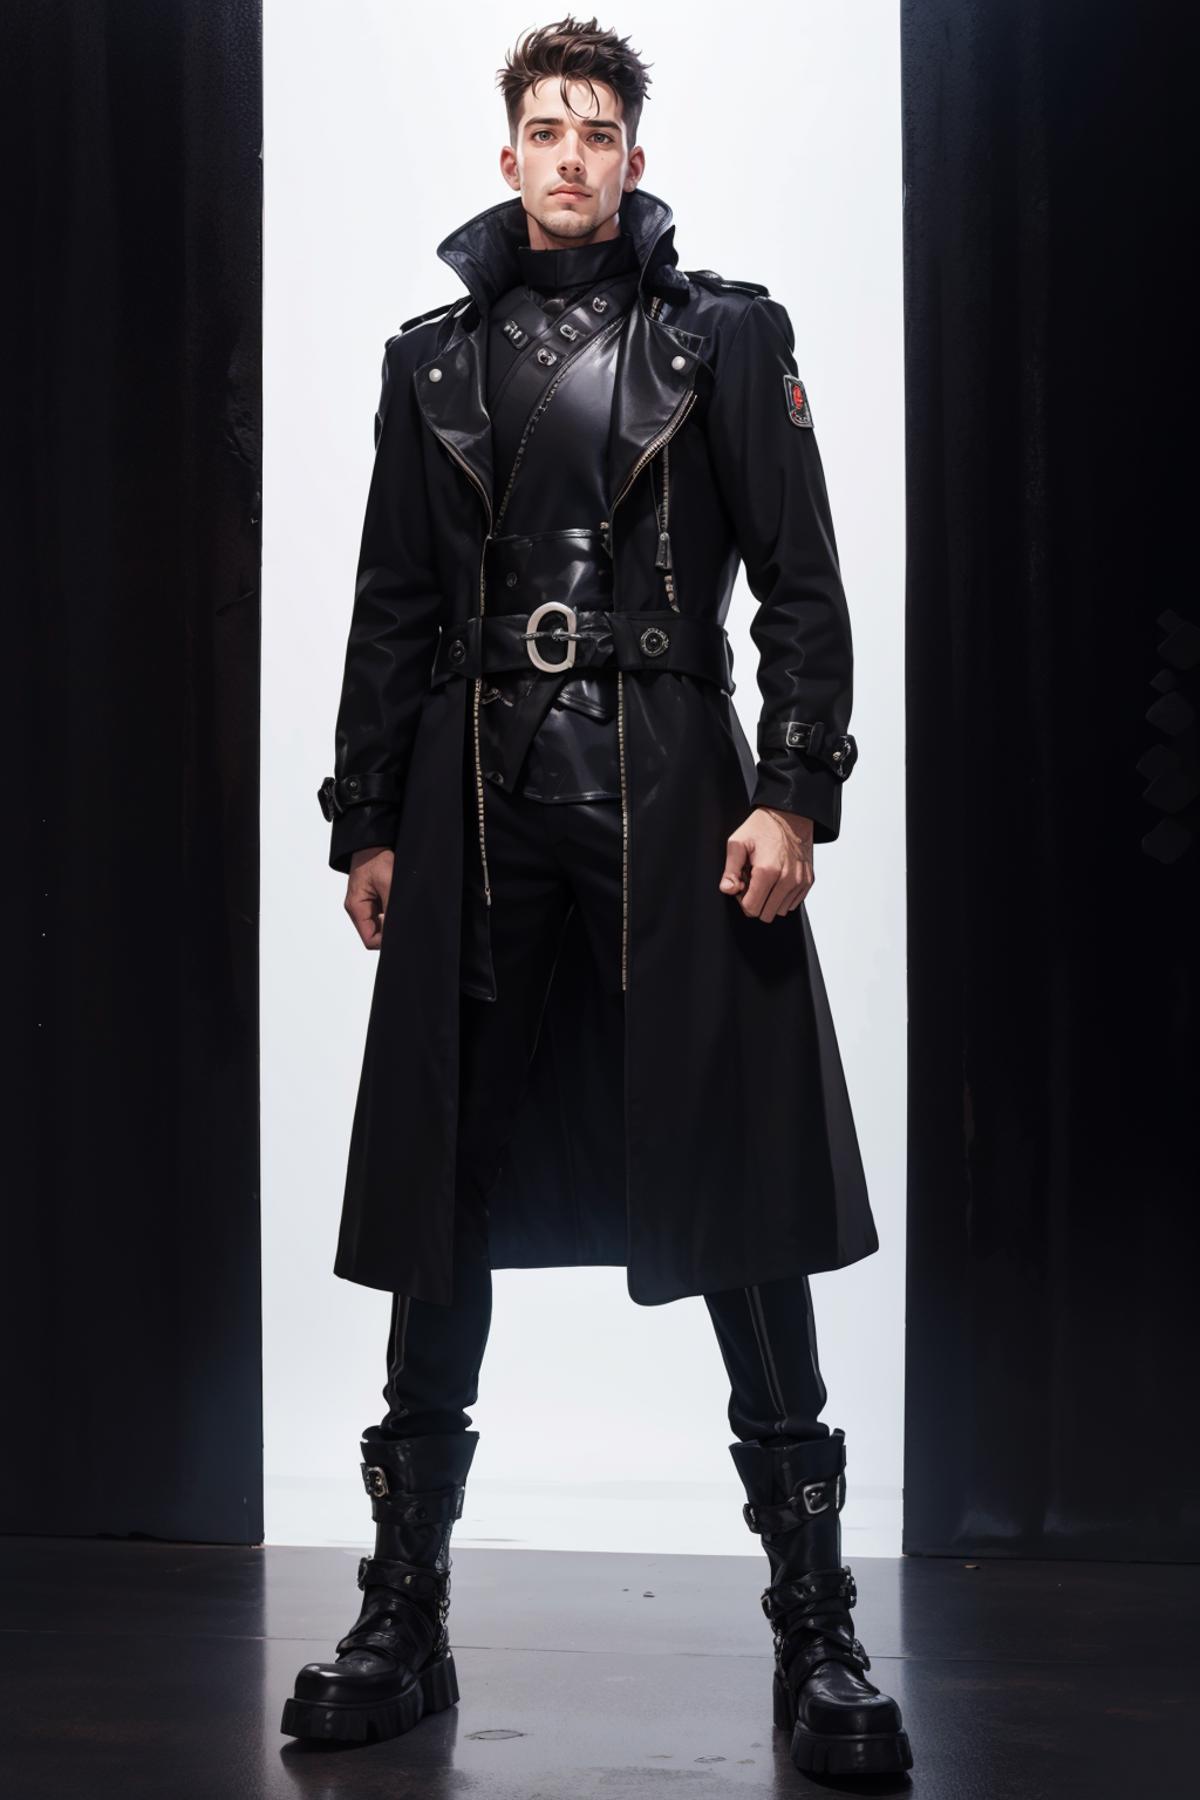 Men's Gothic Jacket/Outfit image by freckledvixon